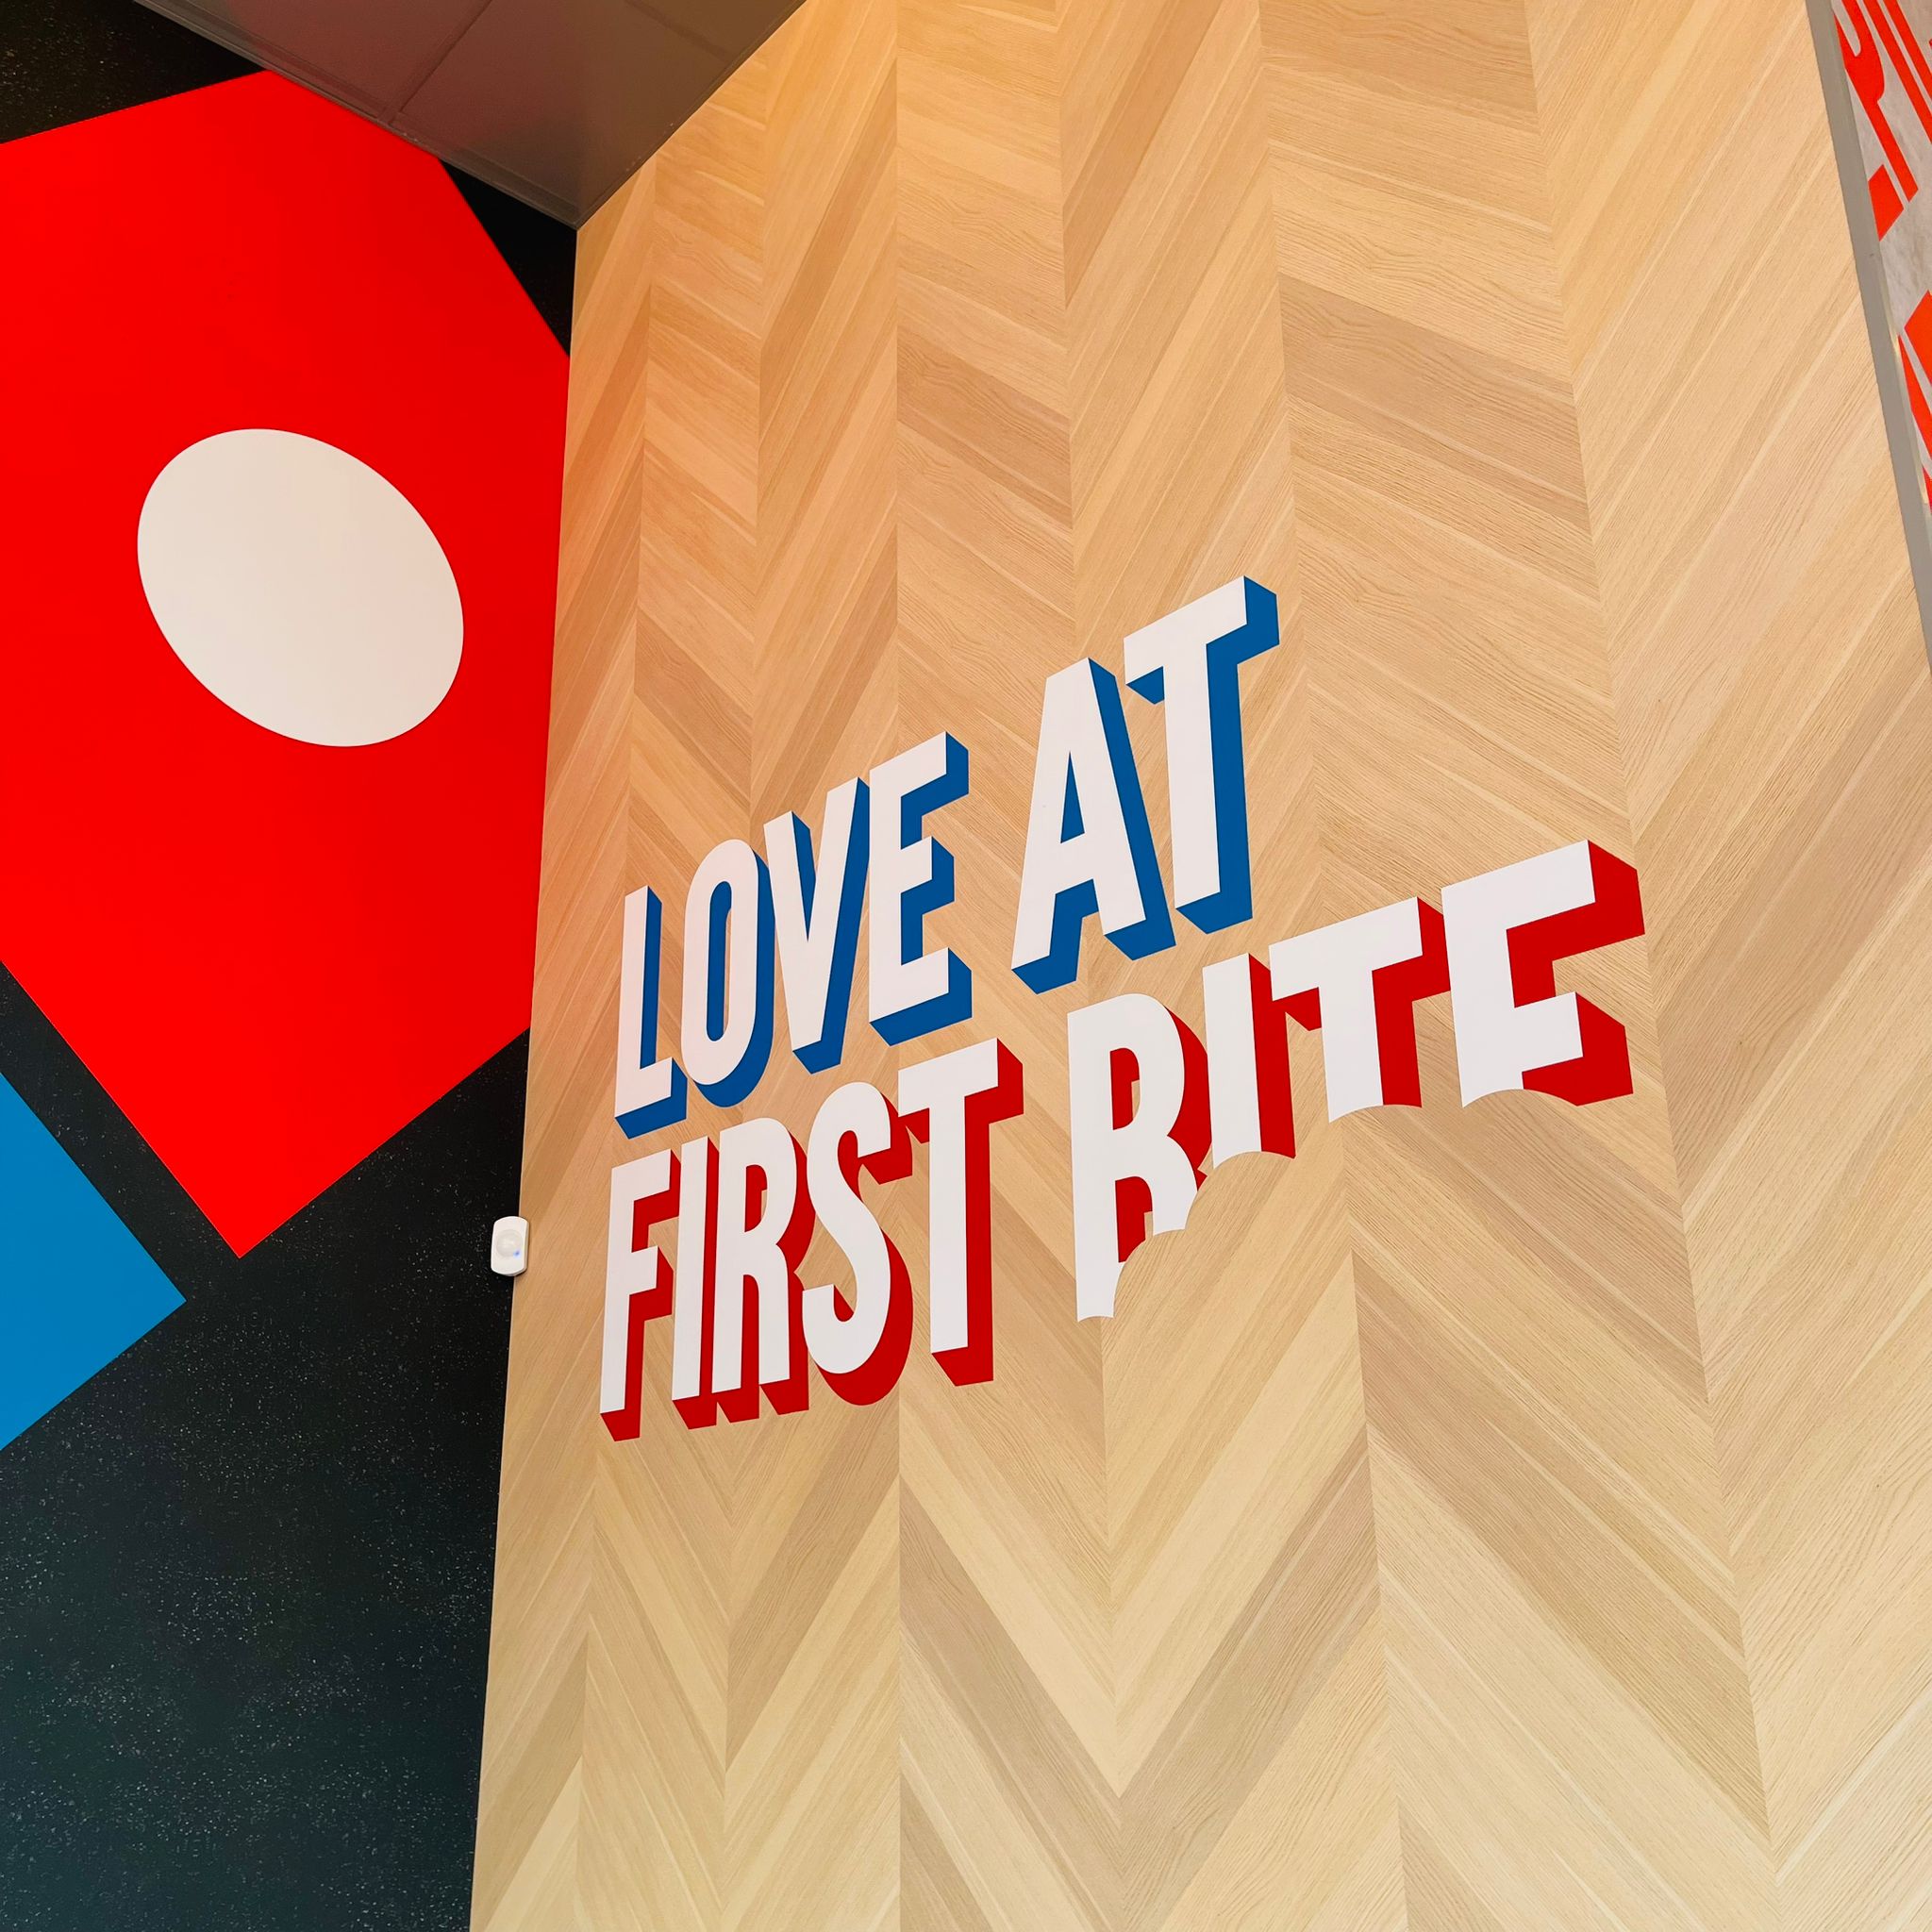 Images Domino's Pizza - Barnsley - Stairfoot